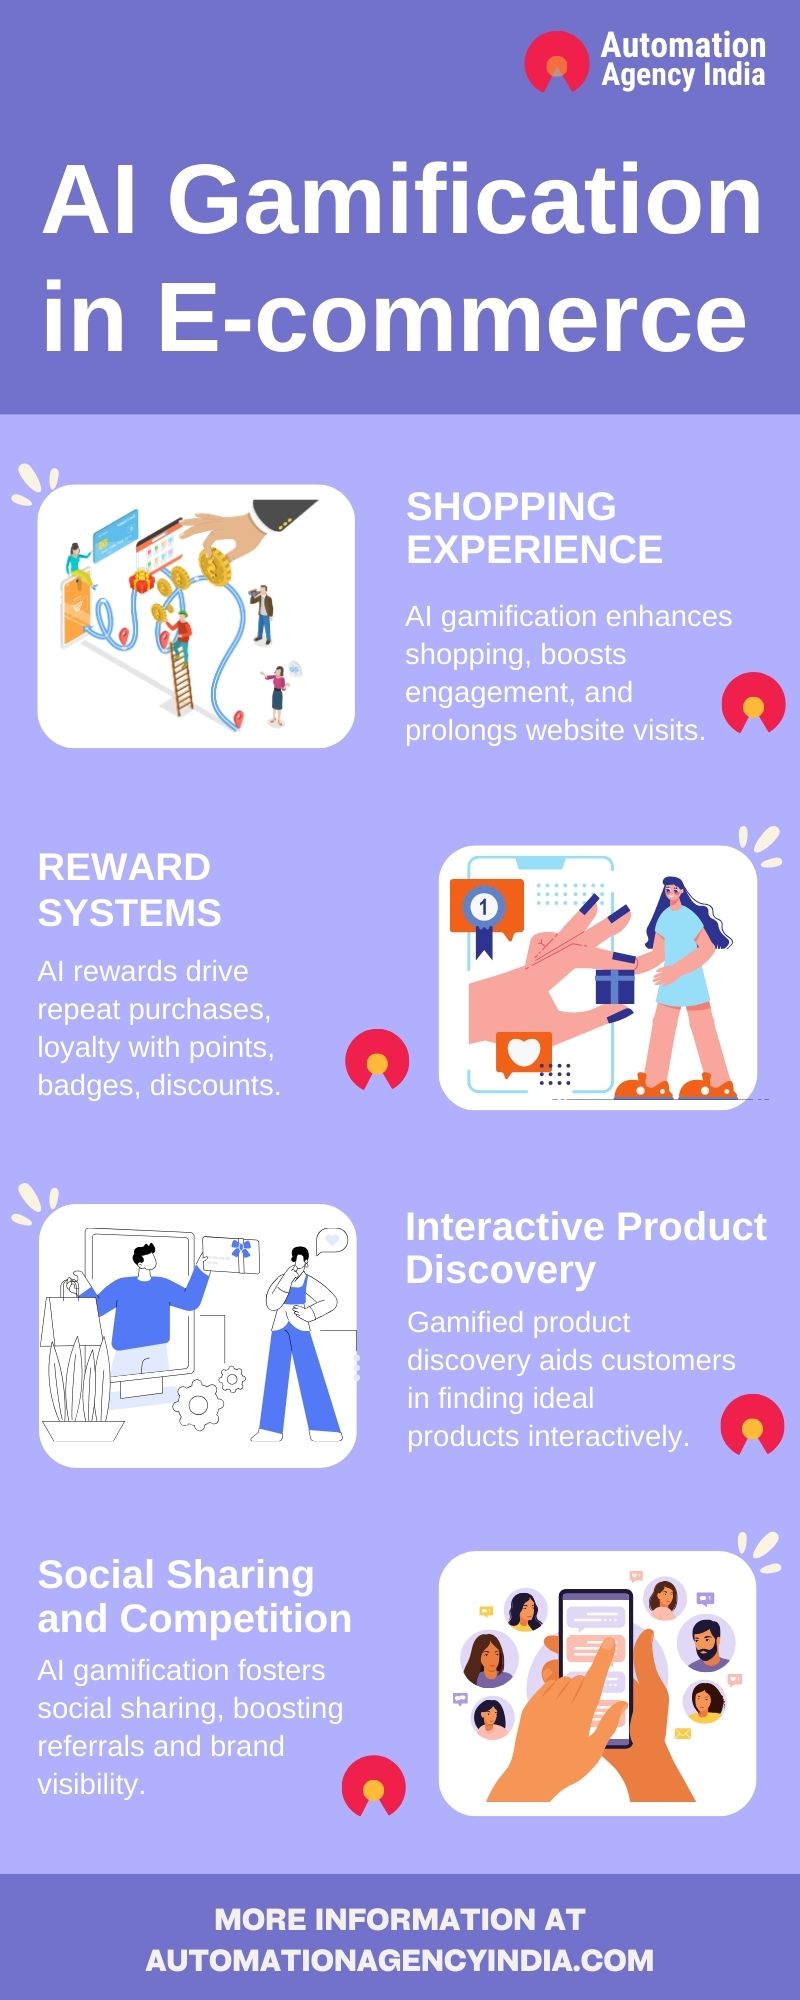 Infographic on AI Gamification in ecommerce